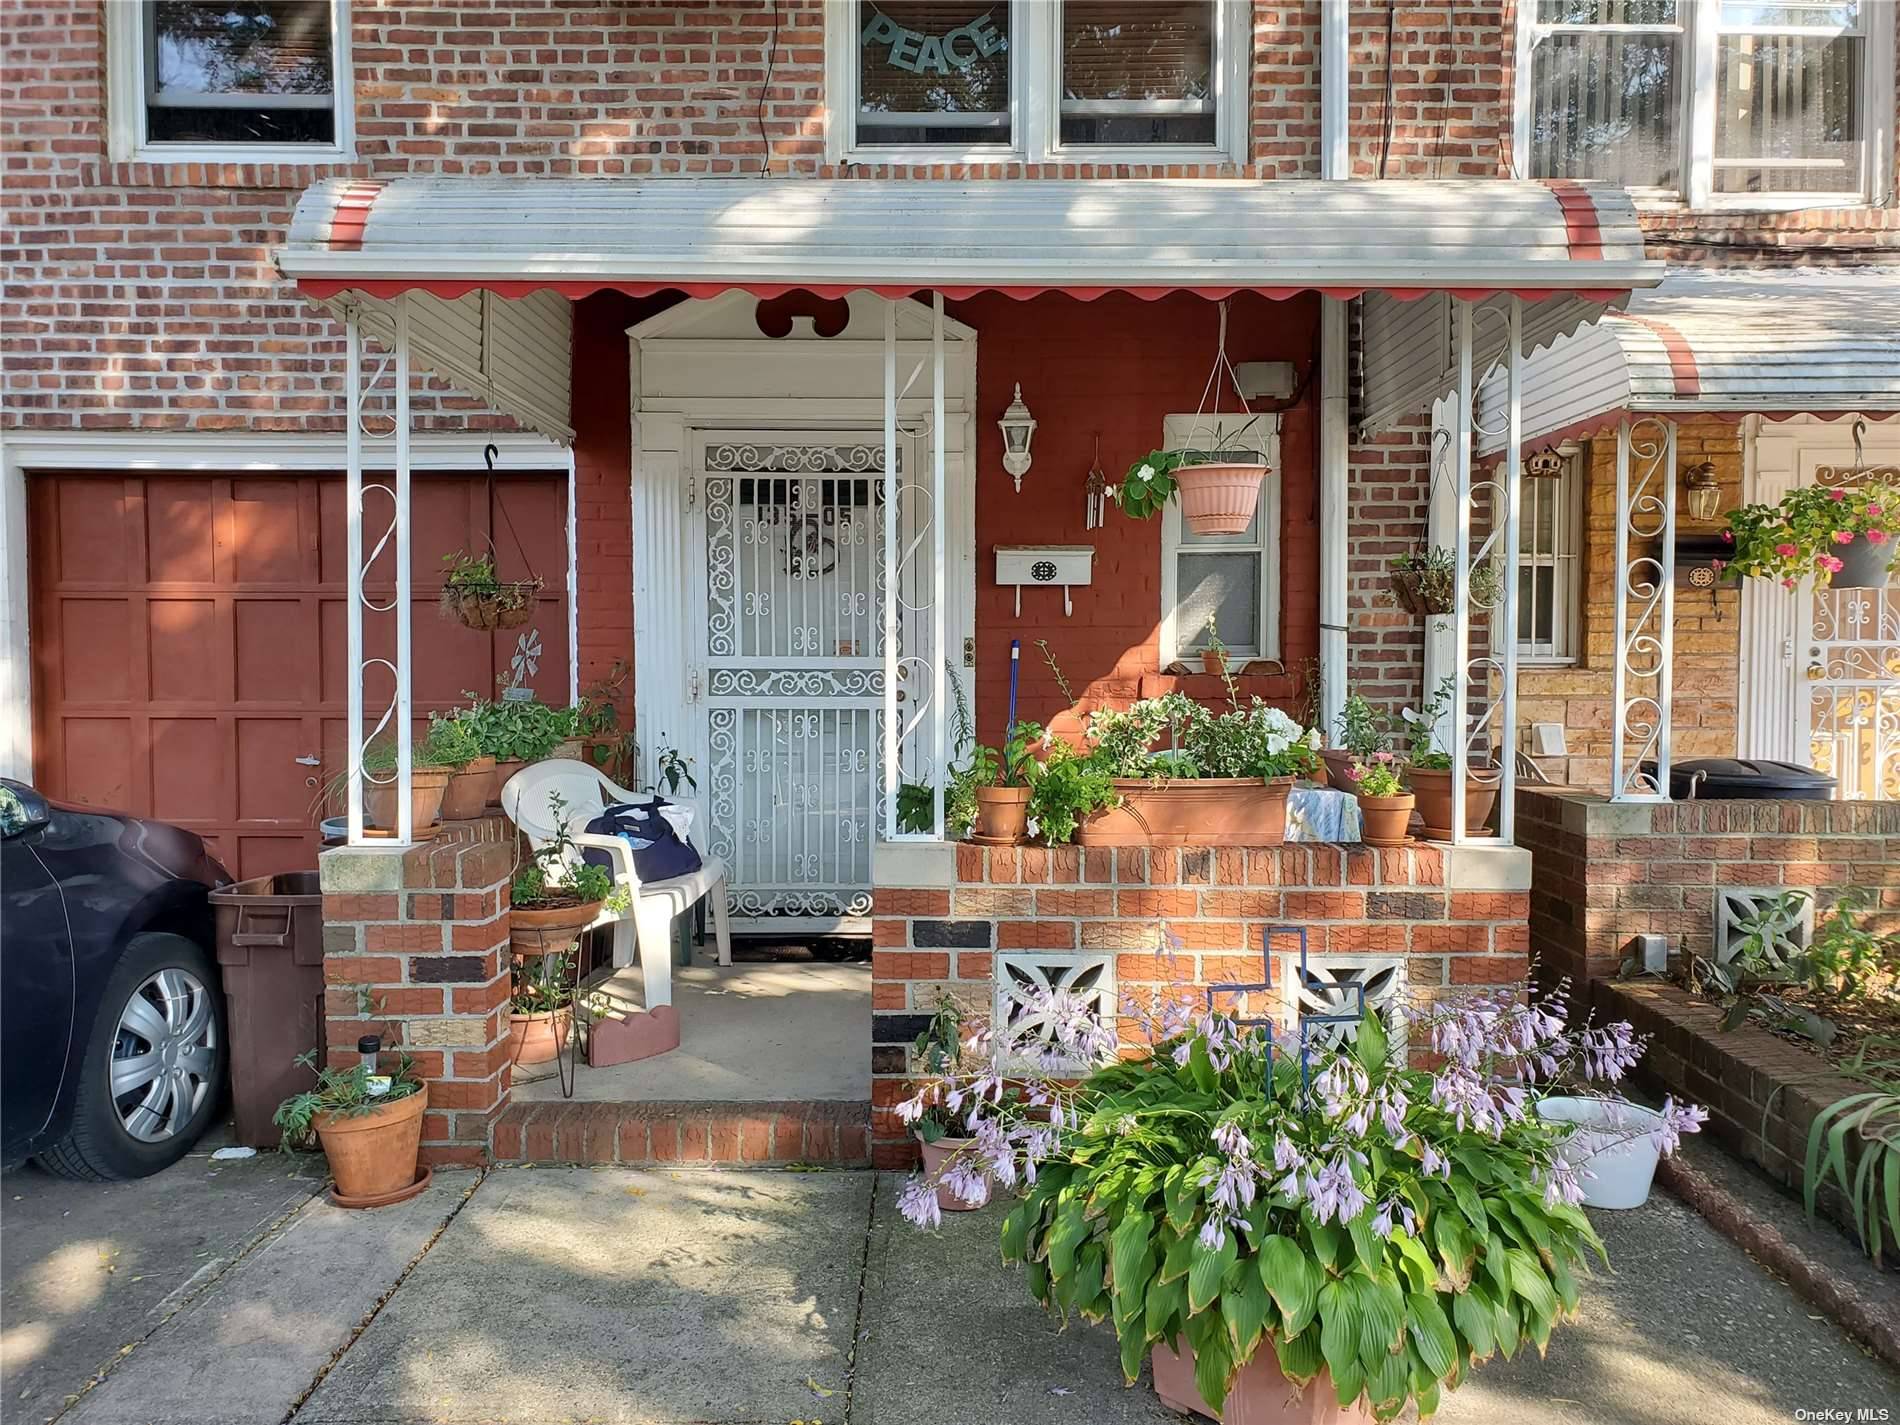 Excellent Opportunity. Great brick home, Price and Location.